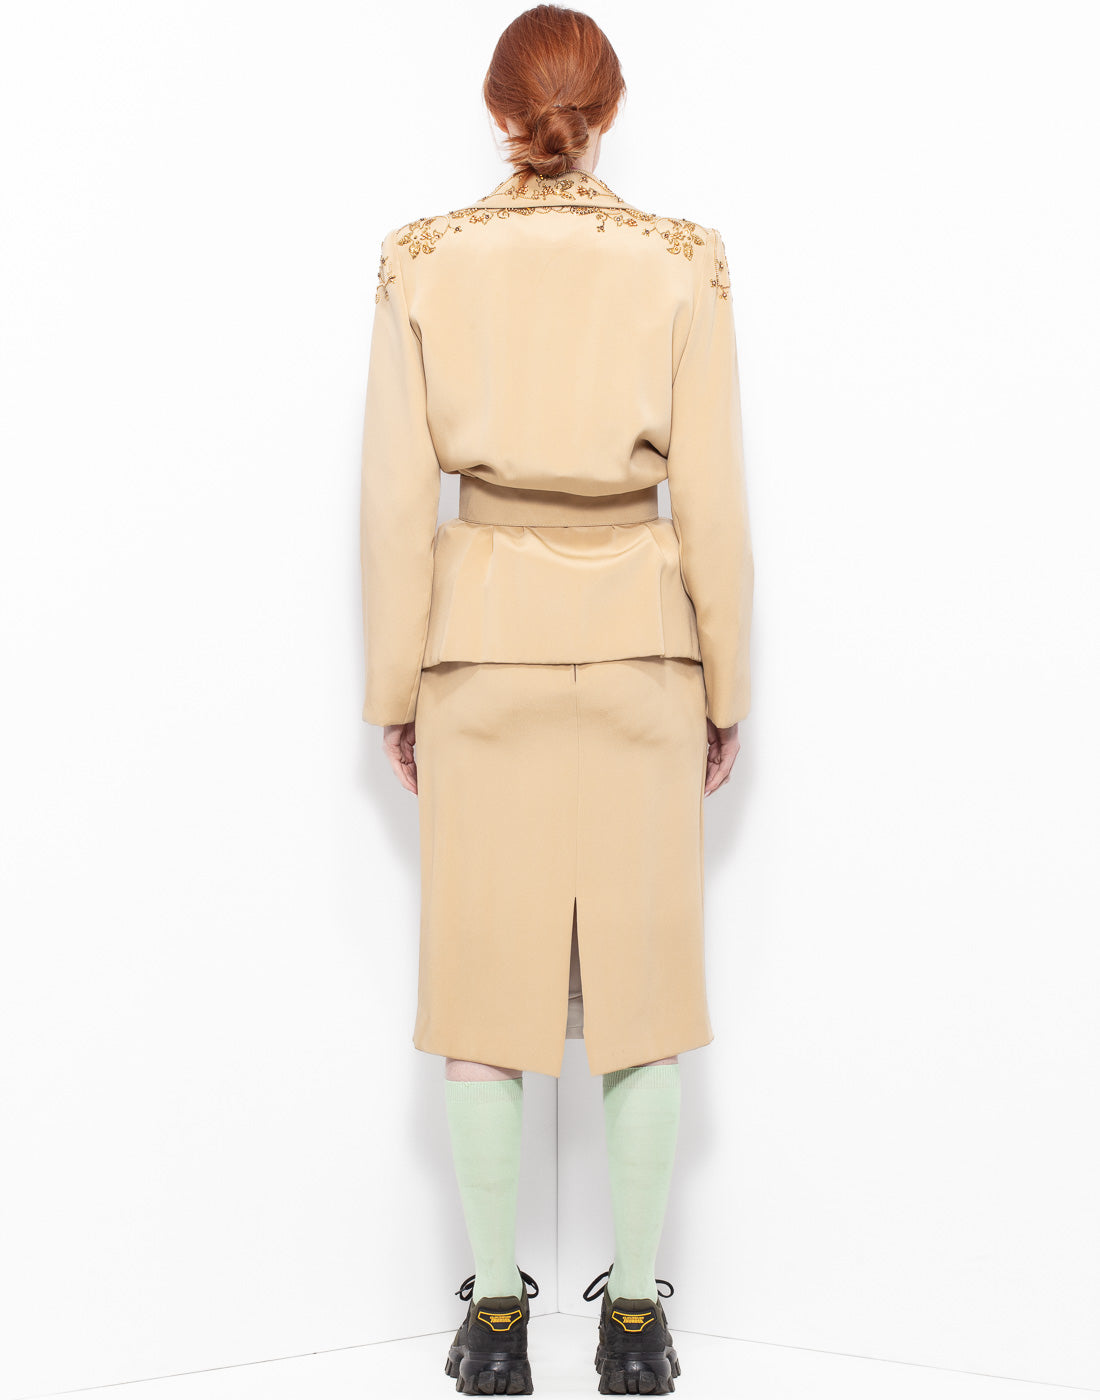 Archive beige blazer + skirt suit with beaded floral embellishments from André Laug